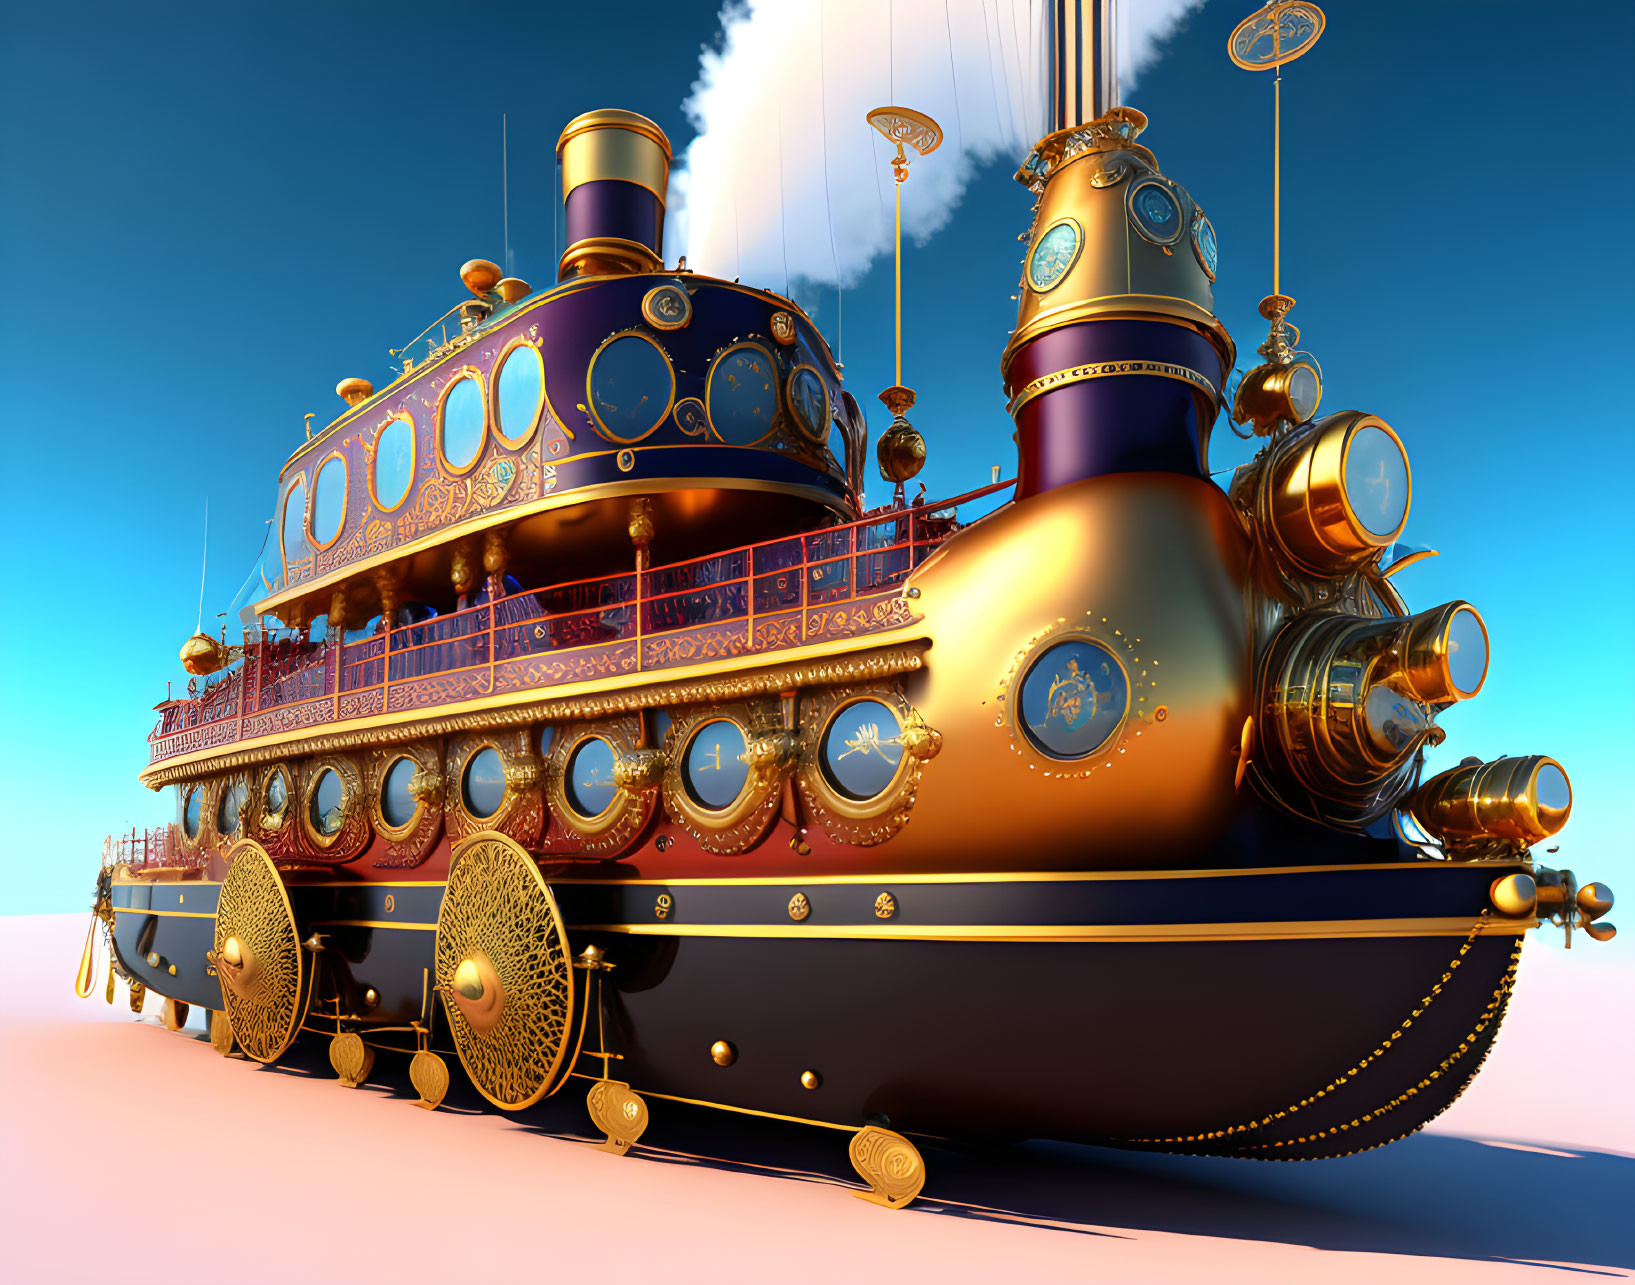 Steampunk-inspired ship with golden details and mechanical elements on blue sky background